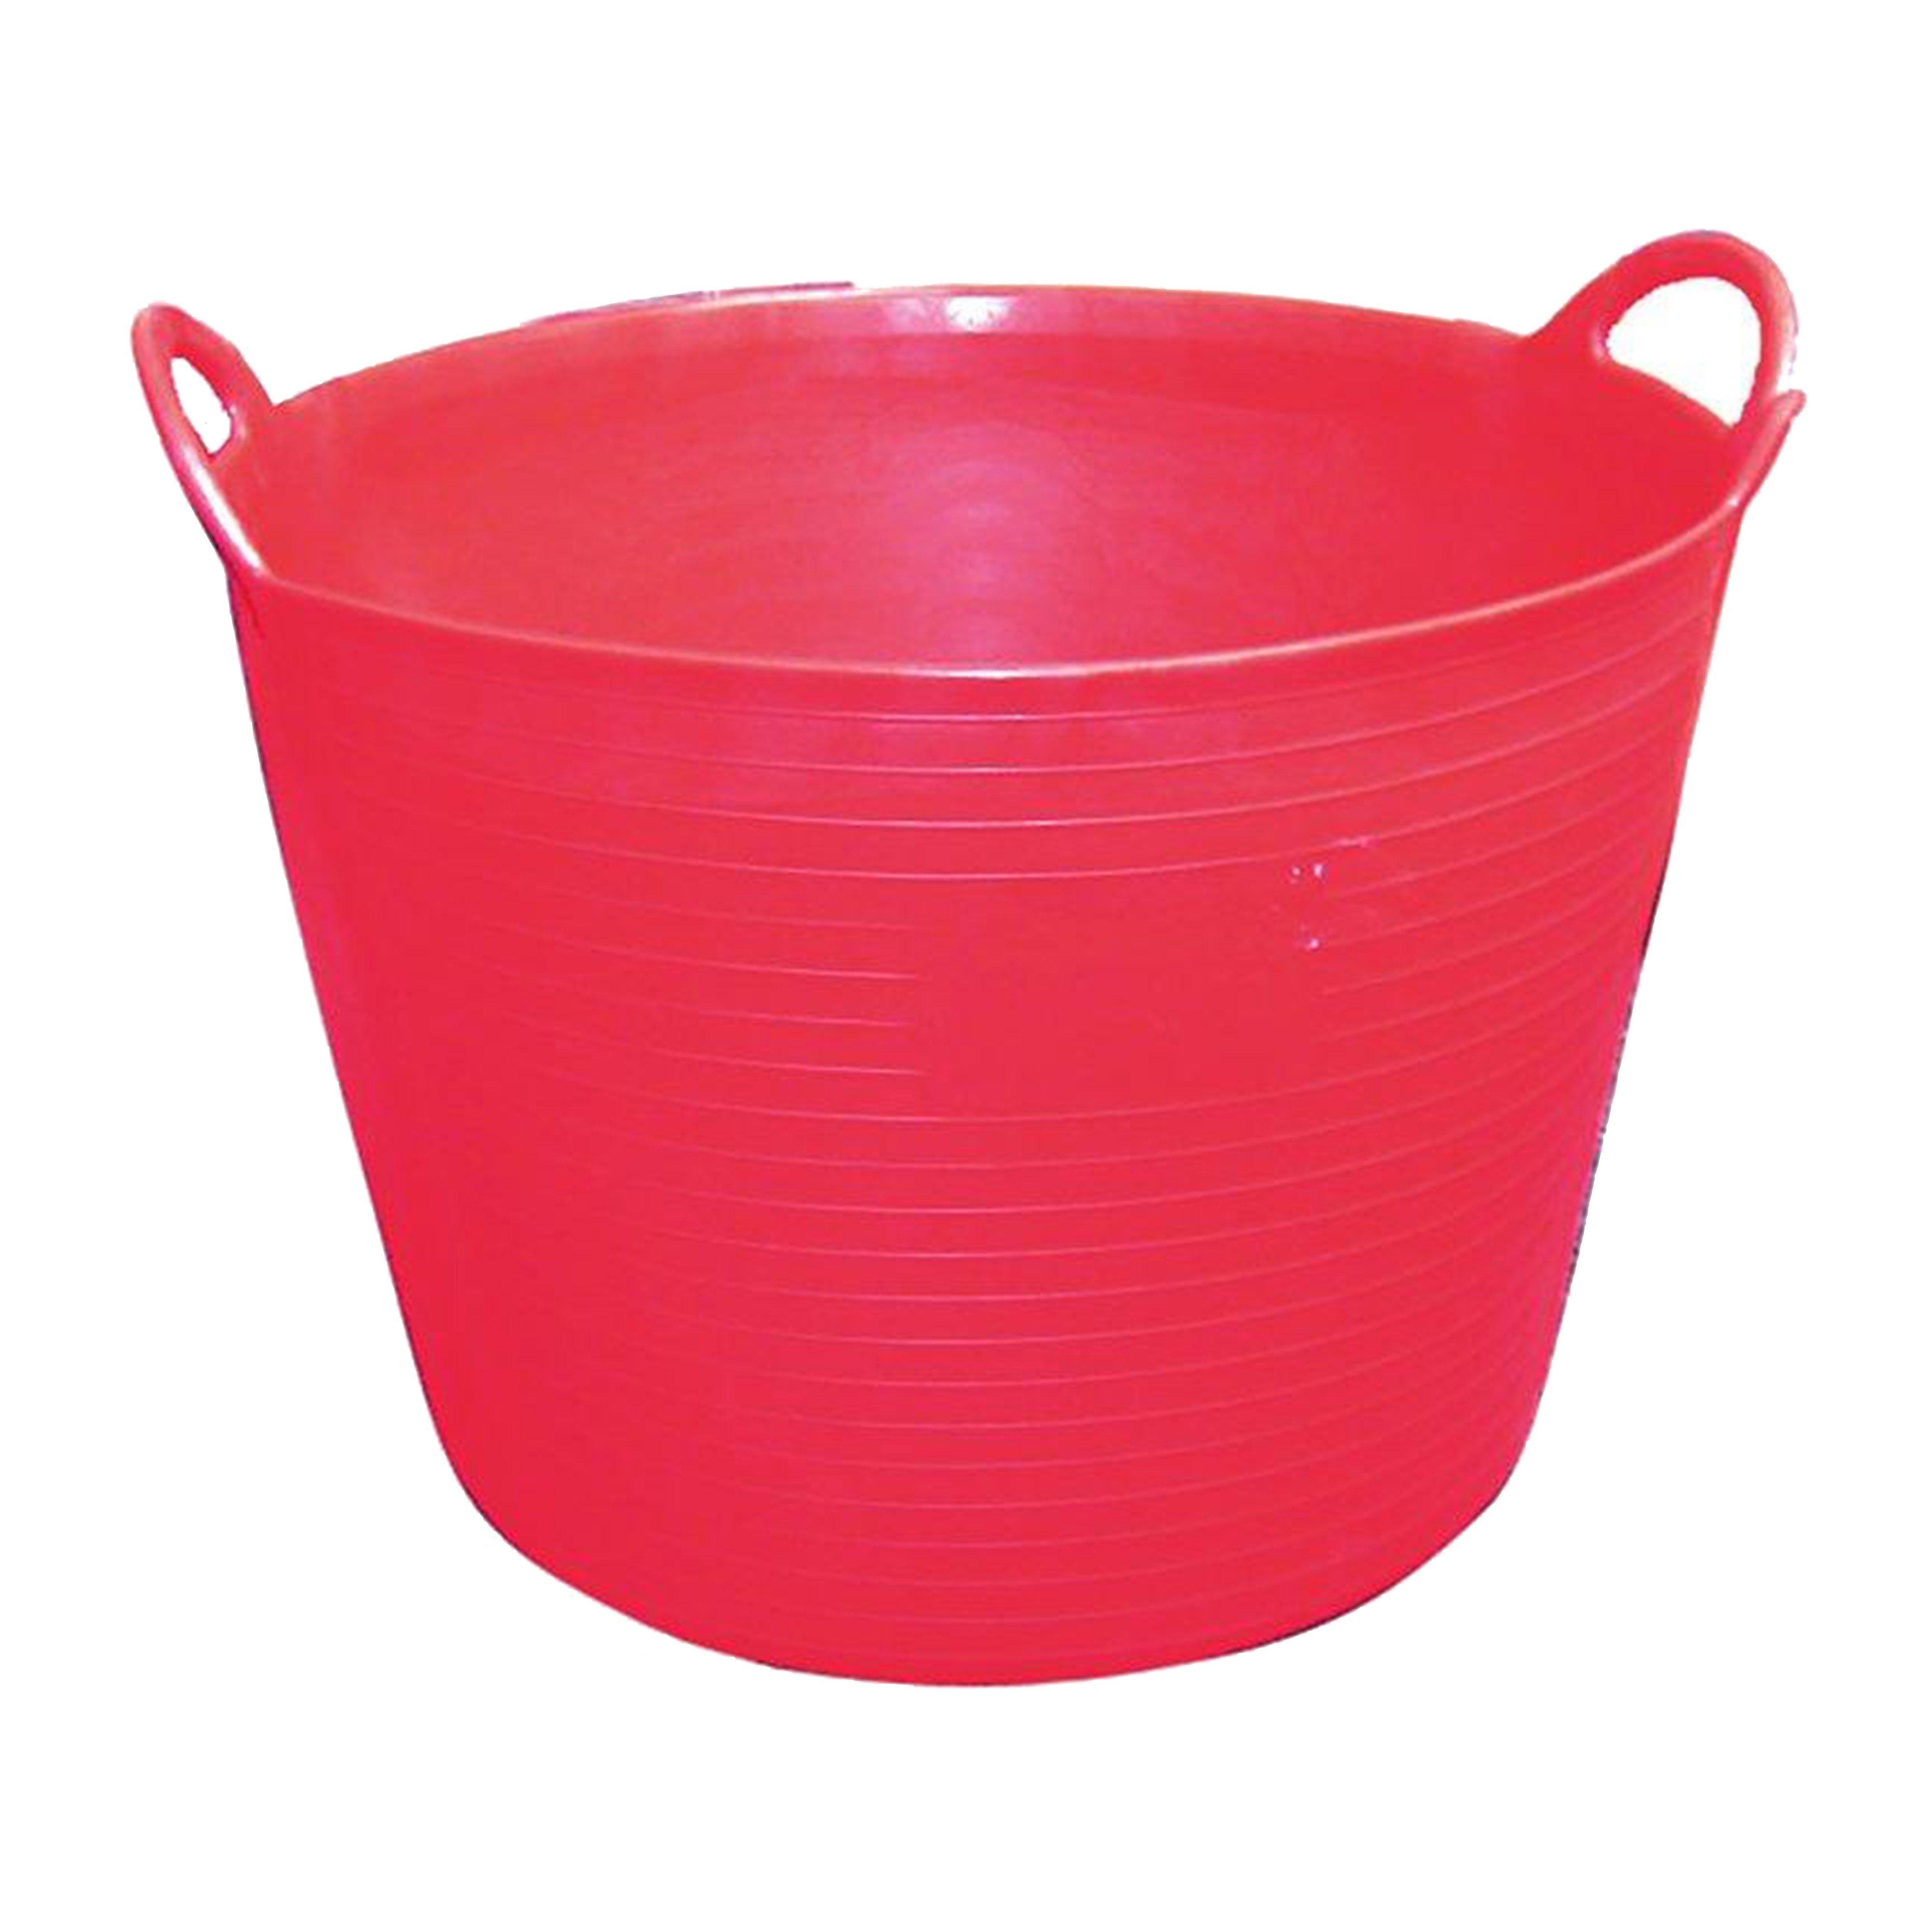 Prostable Flexi Feed Tub (40 Litre) Review